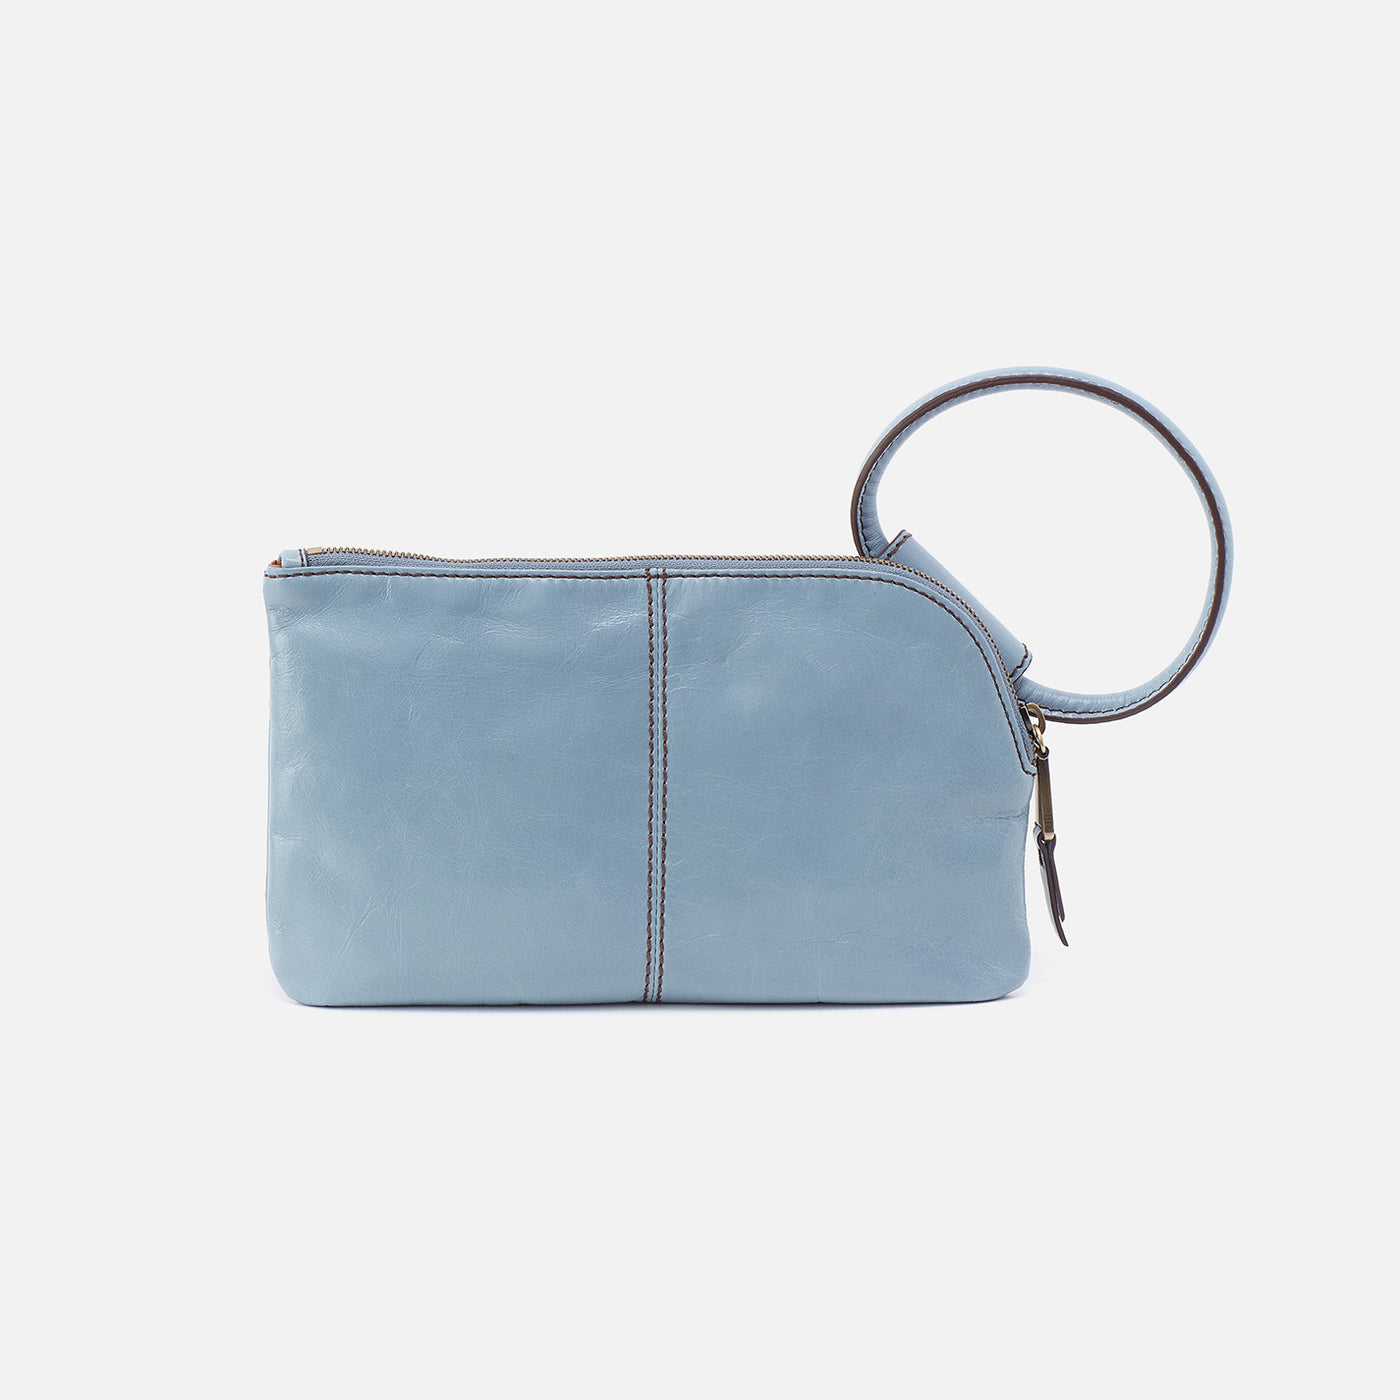 Sable Wristlet in Polished Leather - Cornflower